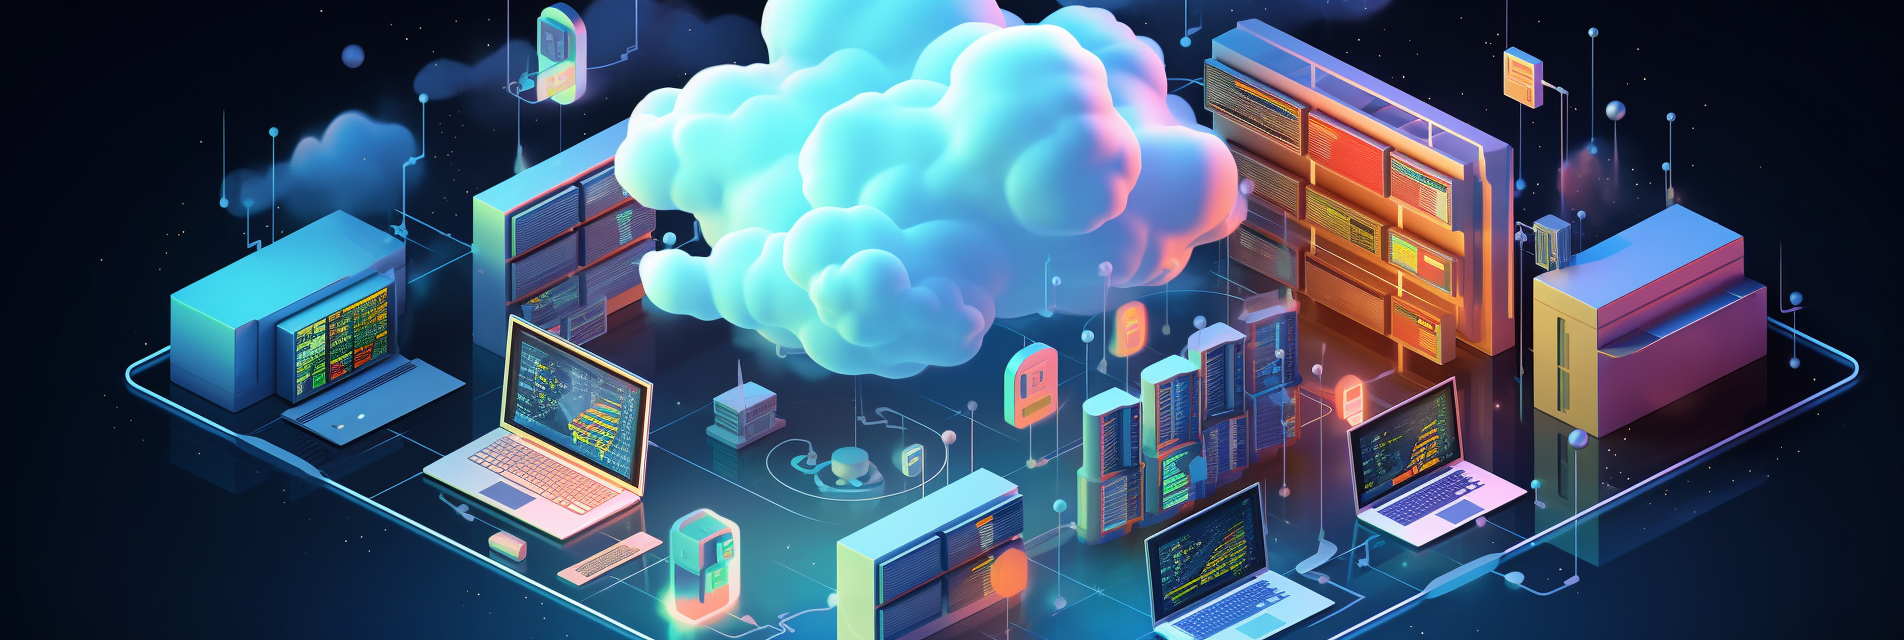 Isometric image of computers and servers circled around a cloud